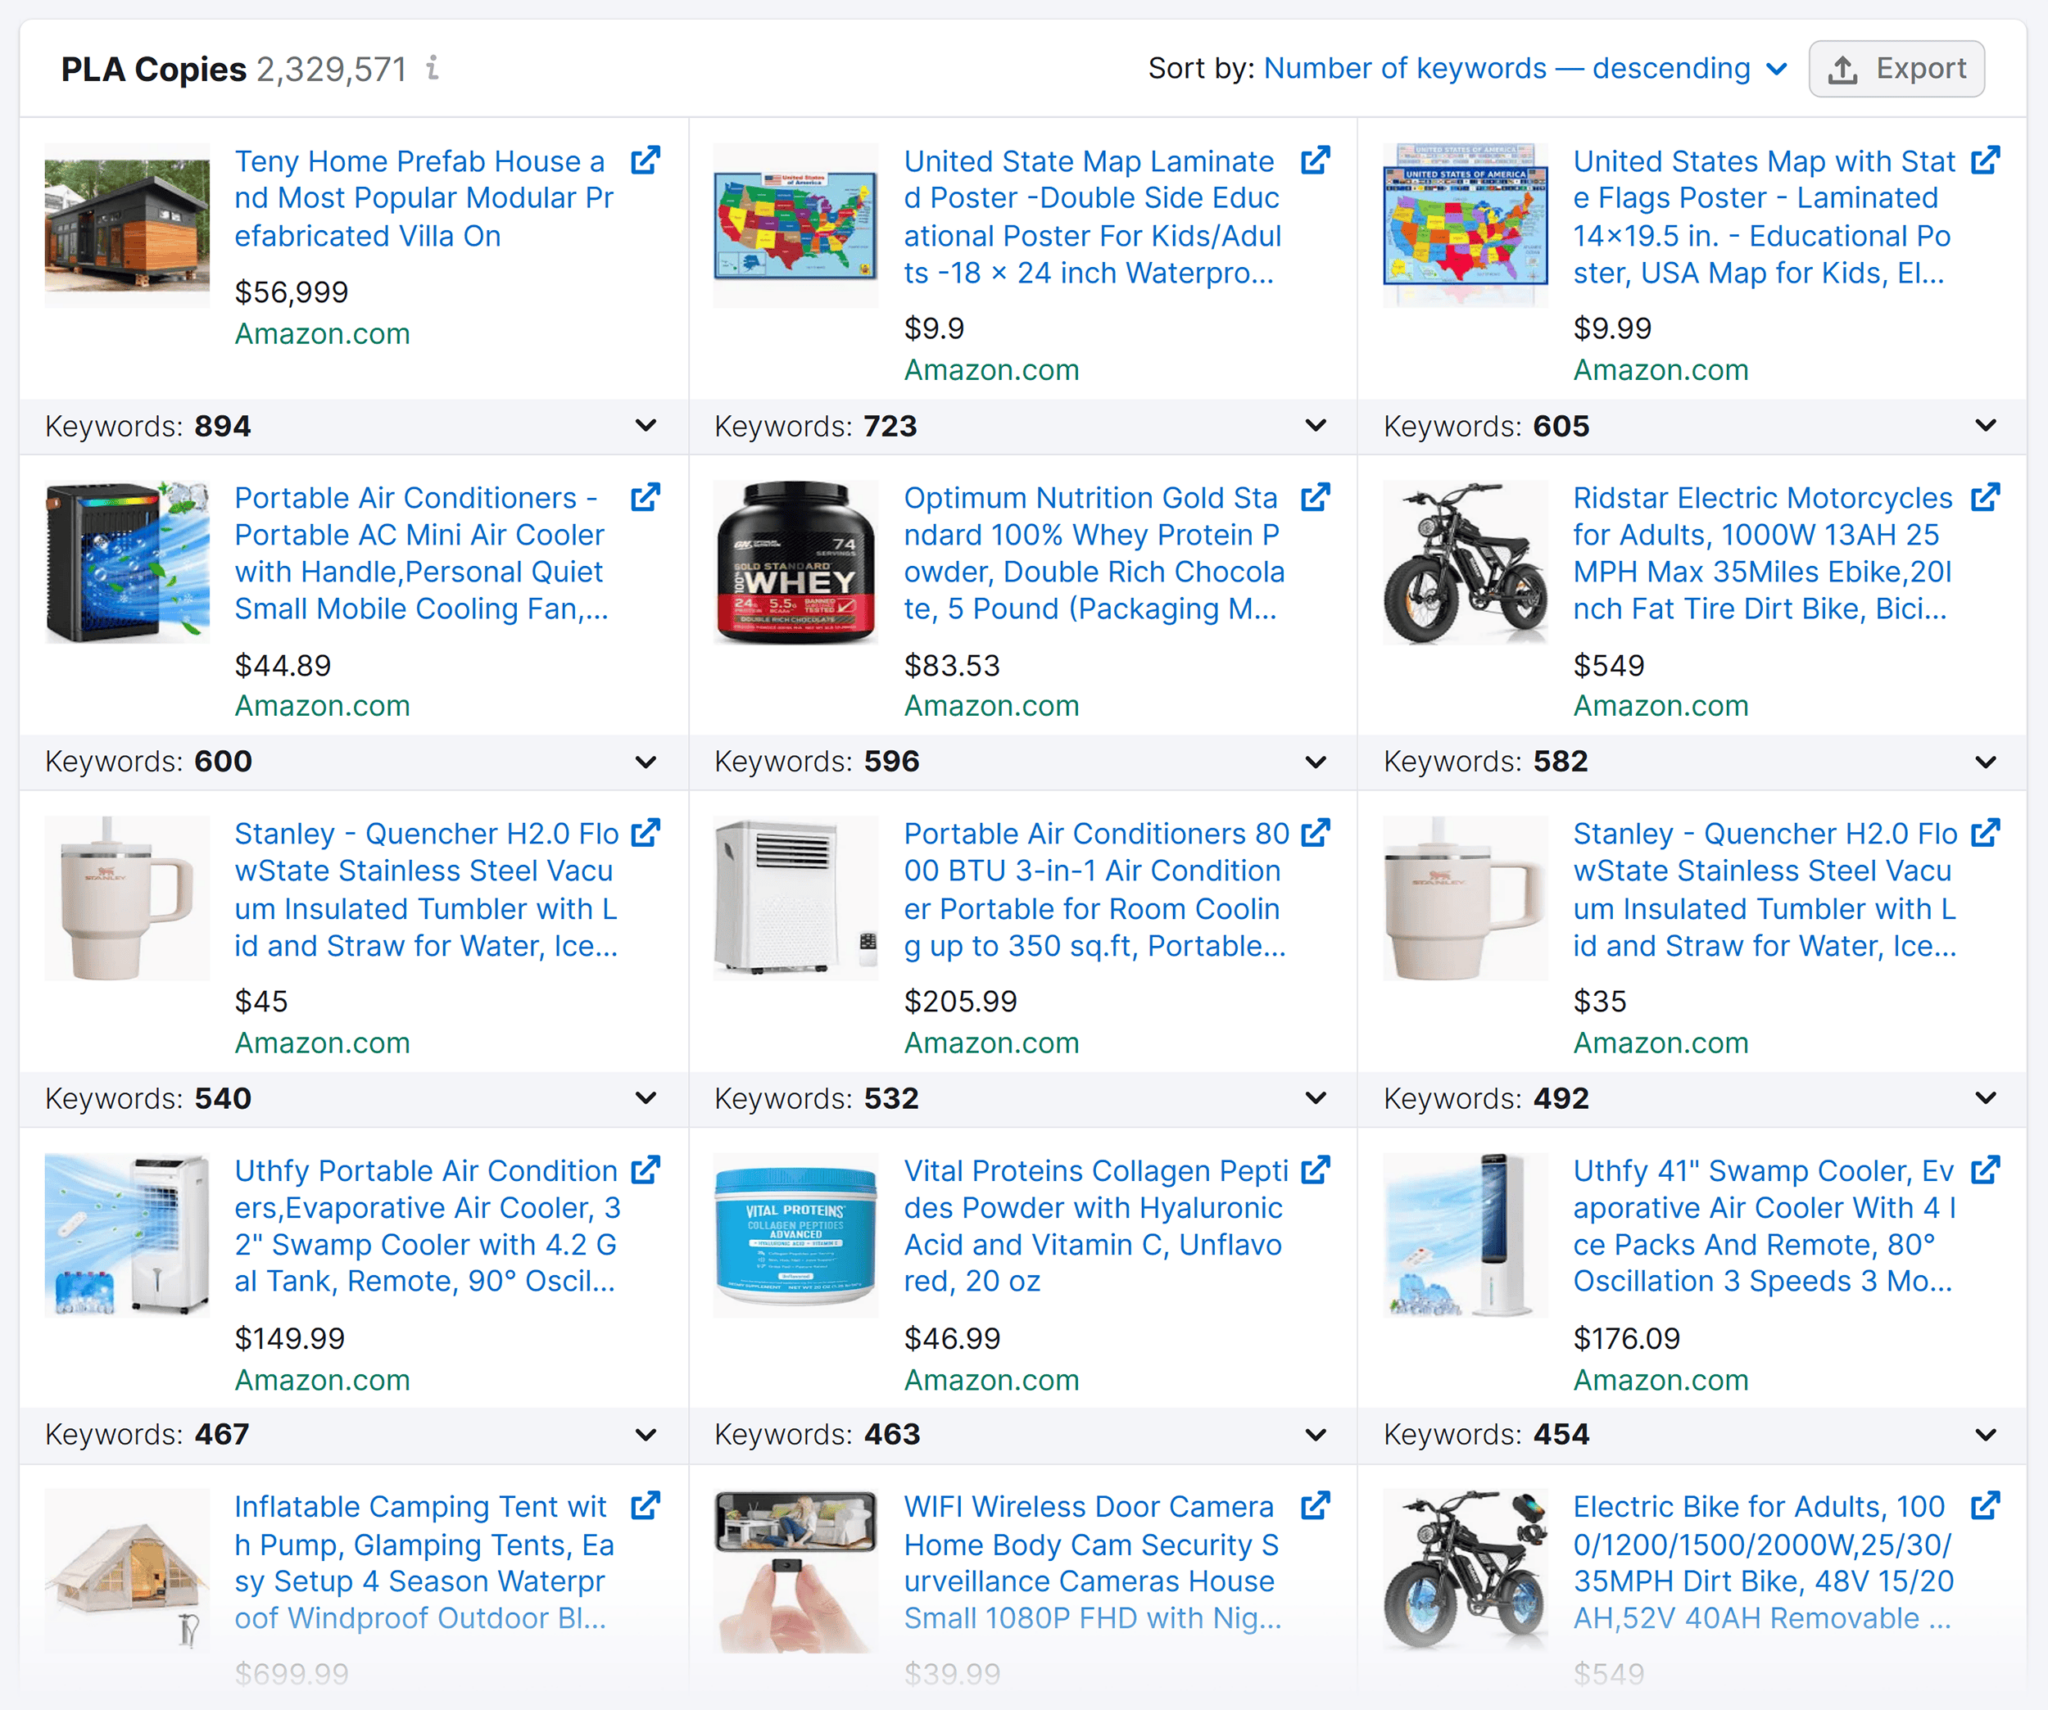 pla-copies-amazon Ecommerce Marketing: 11 Strategies to Drive Traffic and Sales